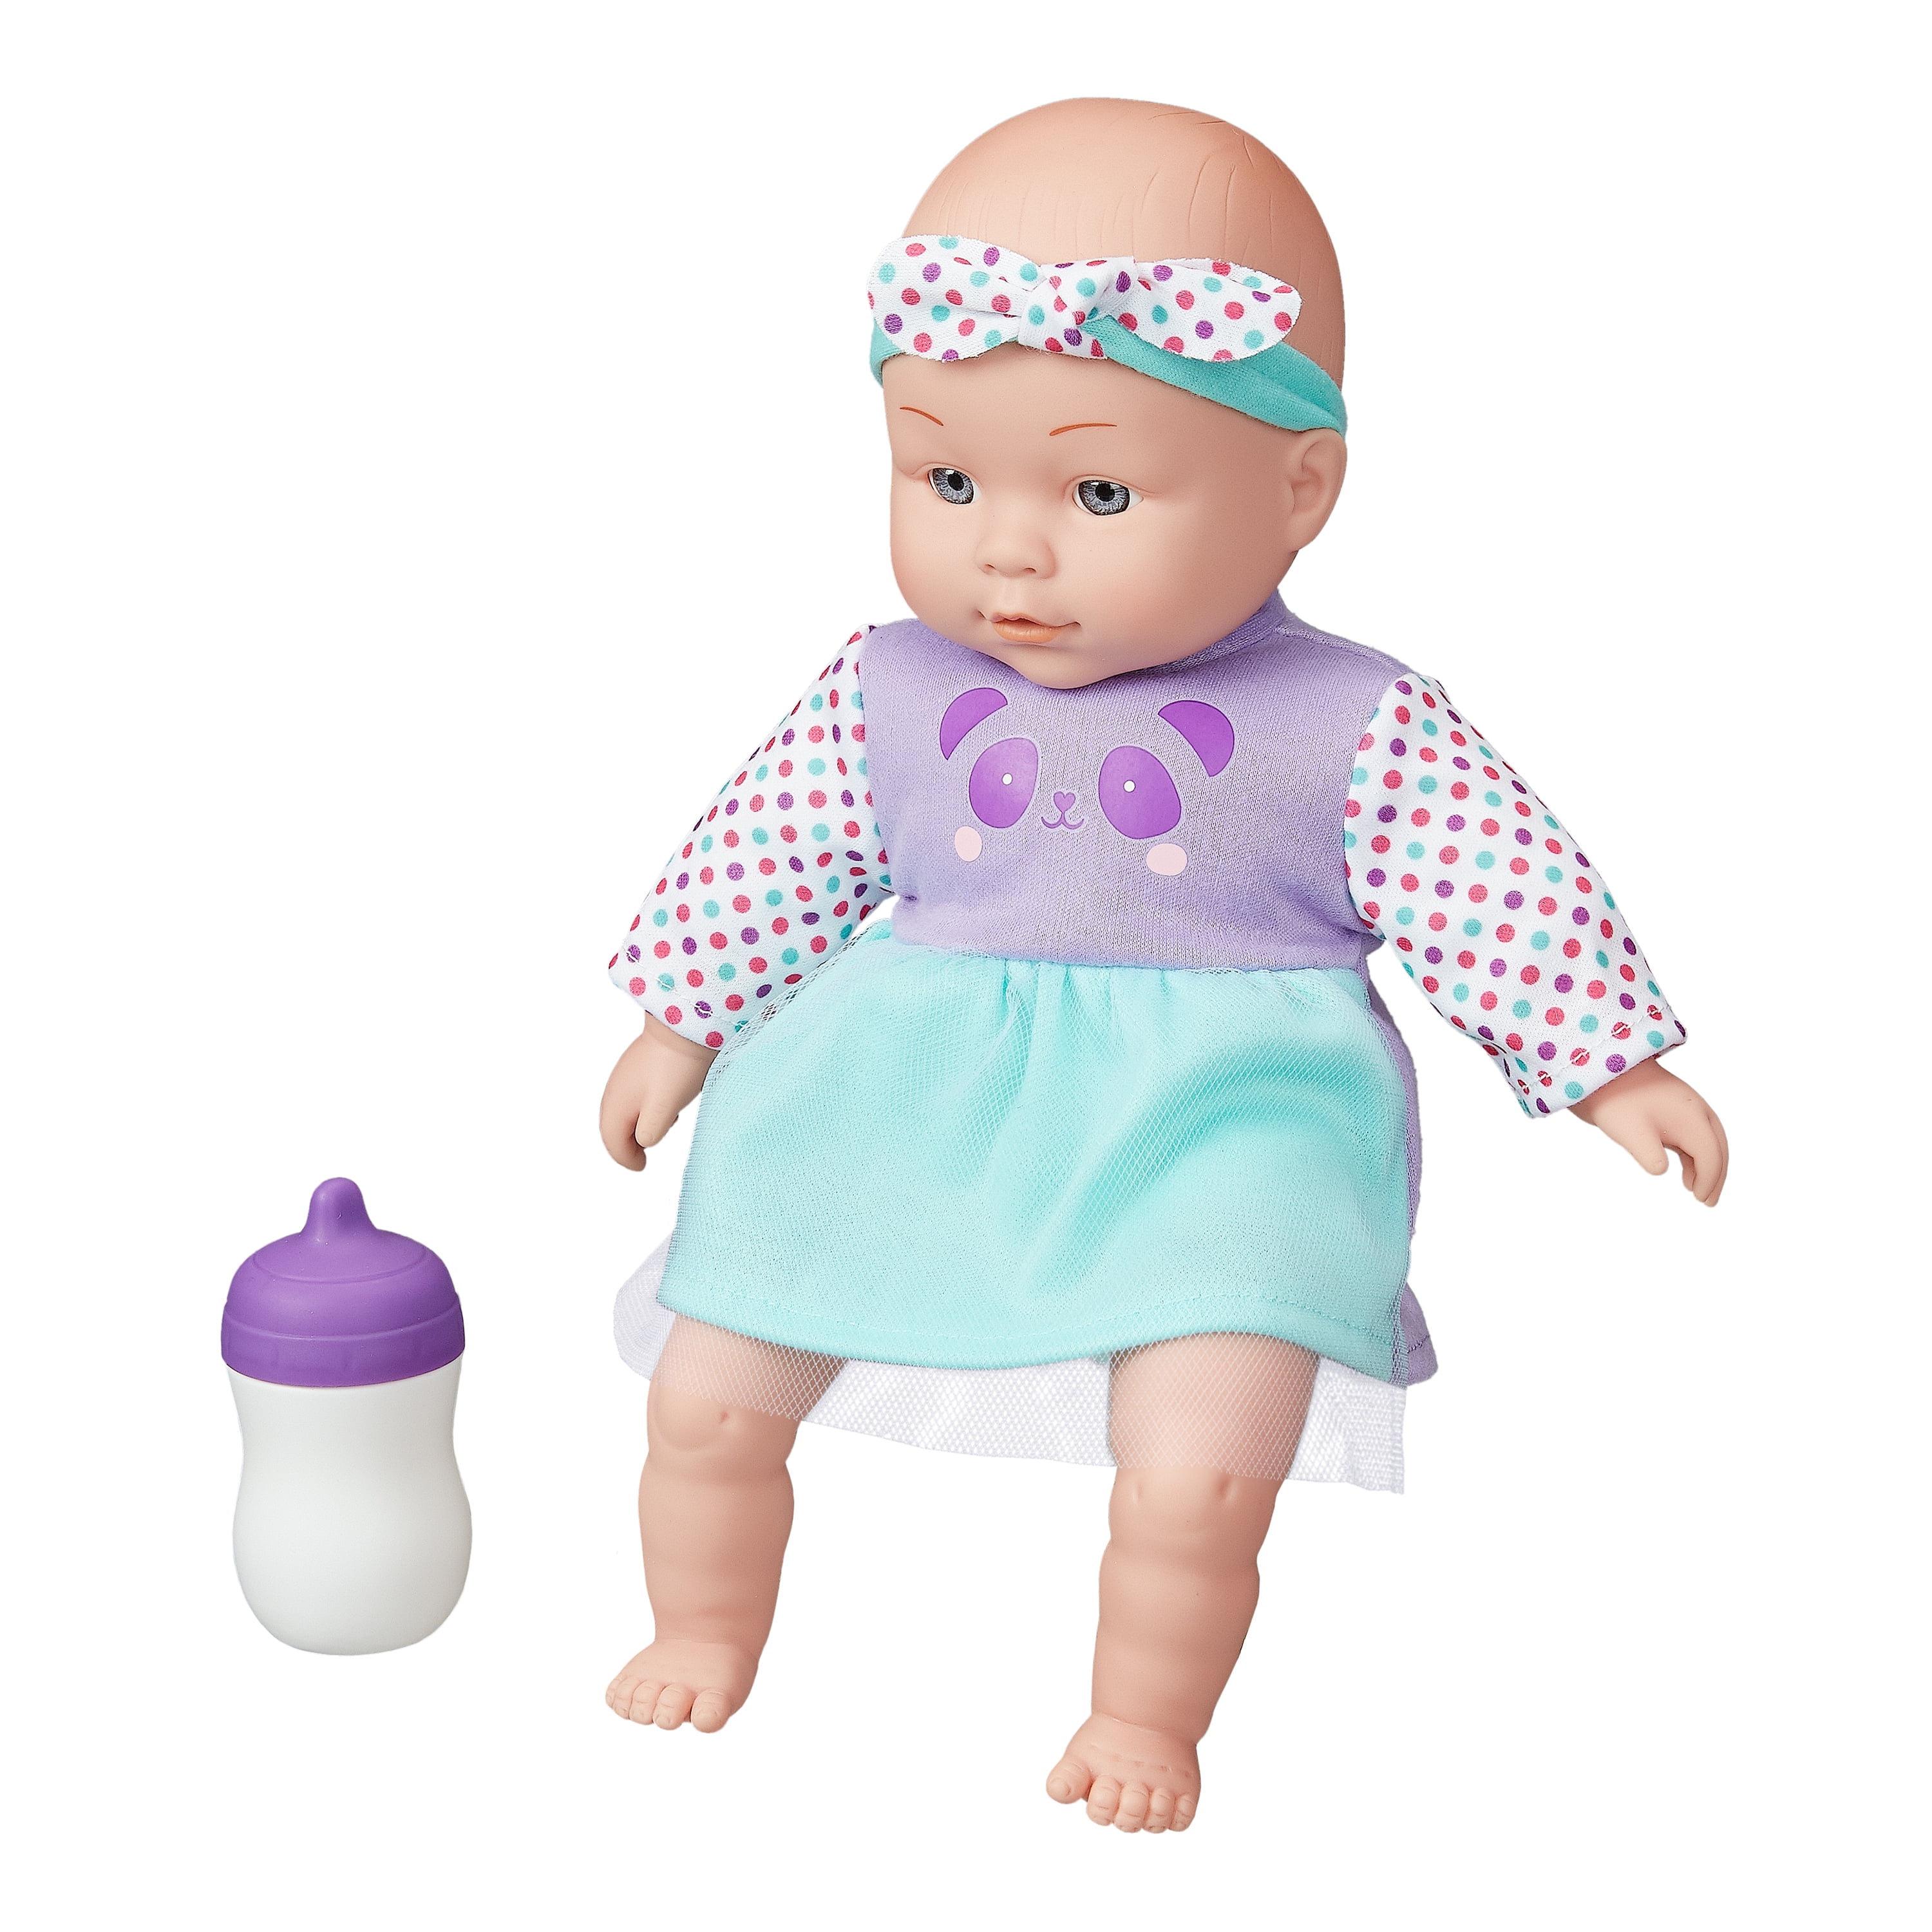 Details about   Adorable 12in  Doll Toddler baby tender hearts NEW "My Soft Baby Doll" 